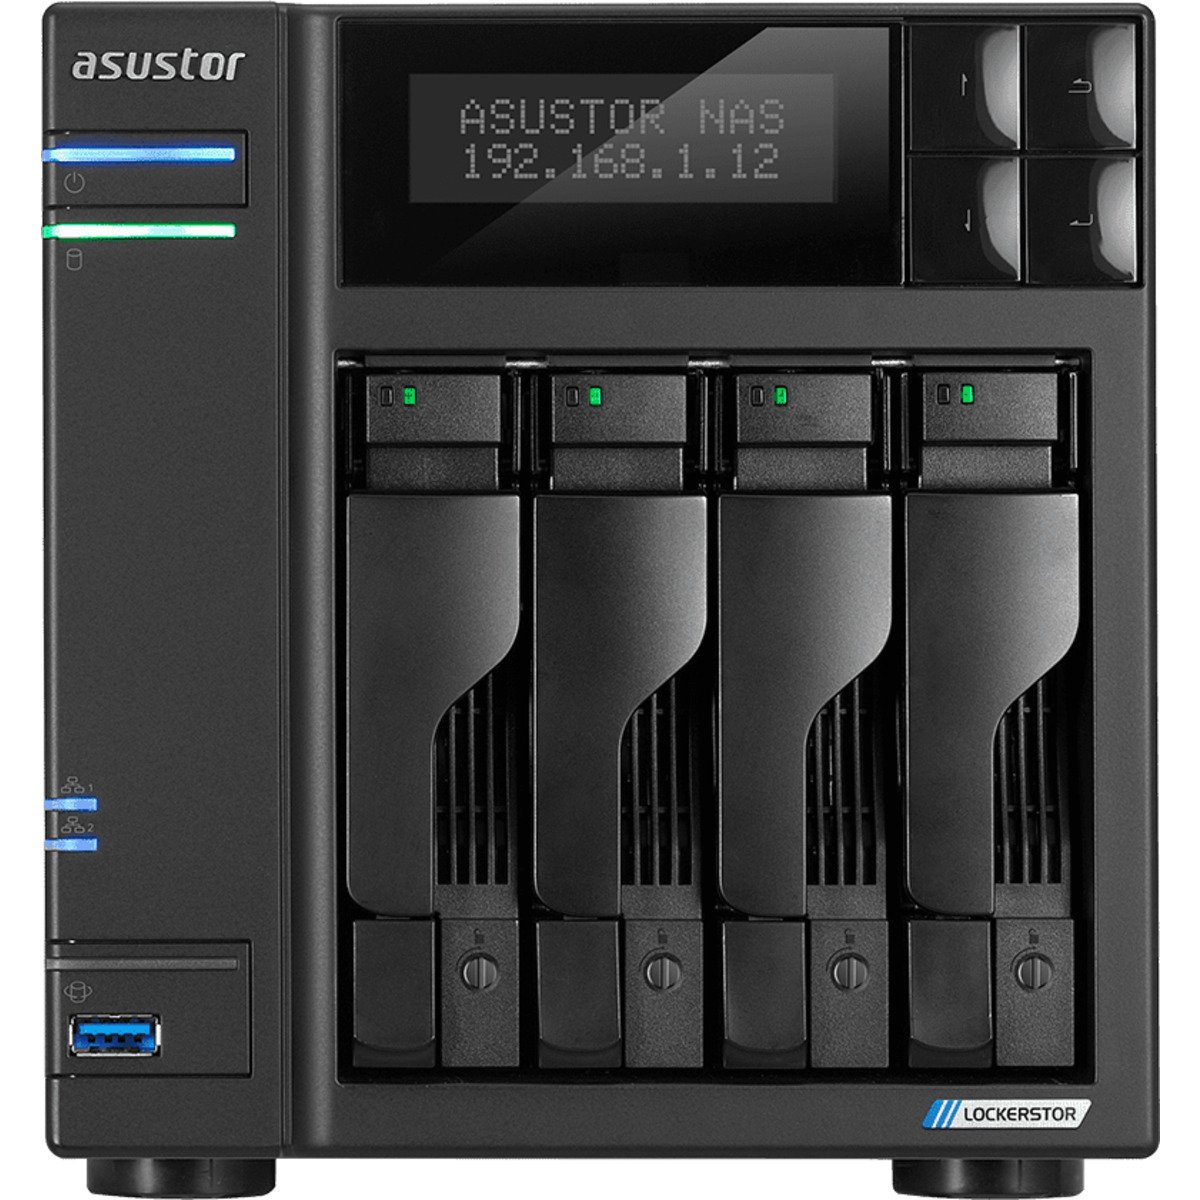 ASUSTOR AS6604T Lockerstor 4 6tb 4-Bay Desktop Multimedia / Power User / Business NAS - Network Attached Storage Device 3x2tb Western Digital Red Pro WD2002FFSX 3.5 7200rpm SATA 6Gb/s HDD NAS Class Drives Installed - Burn-In Tested - FREE RAM UPGRADE AS6604T Lockerstor 4